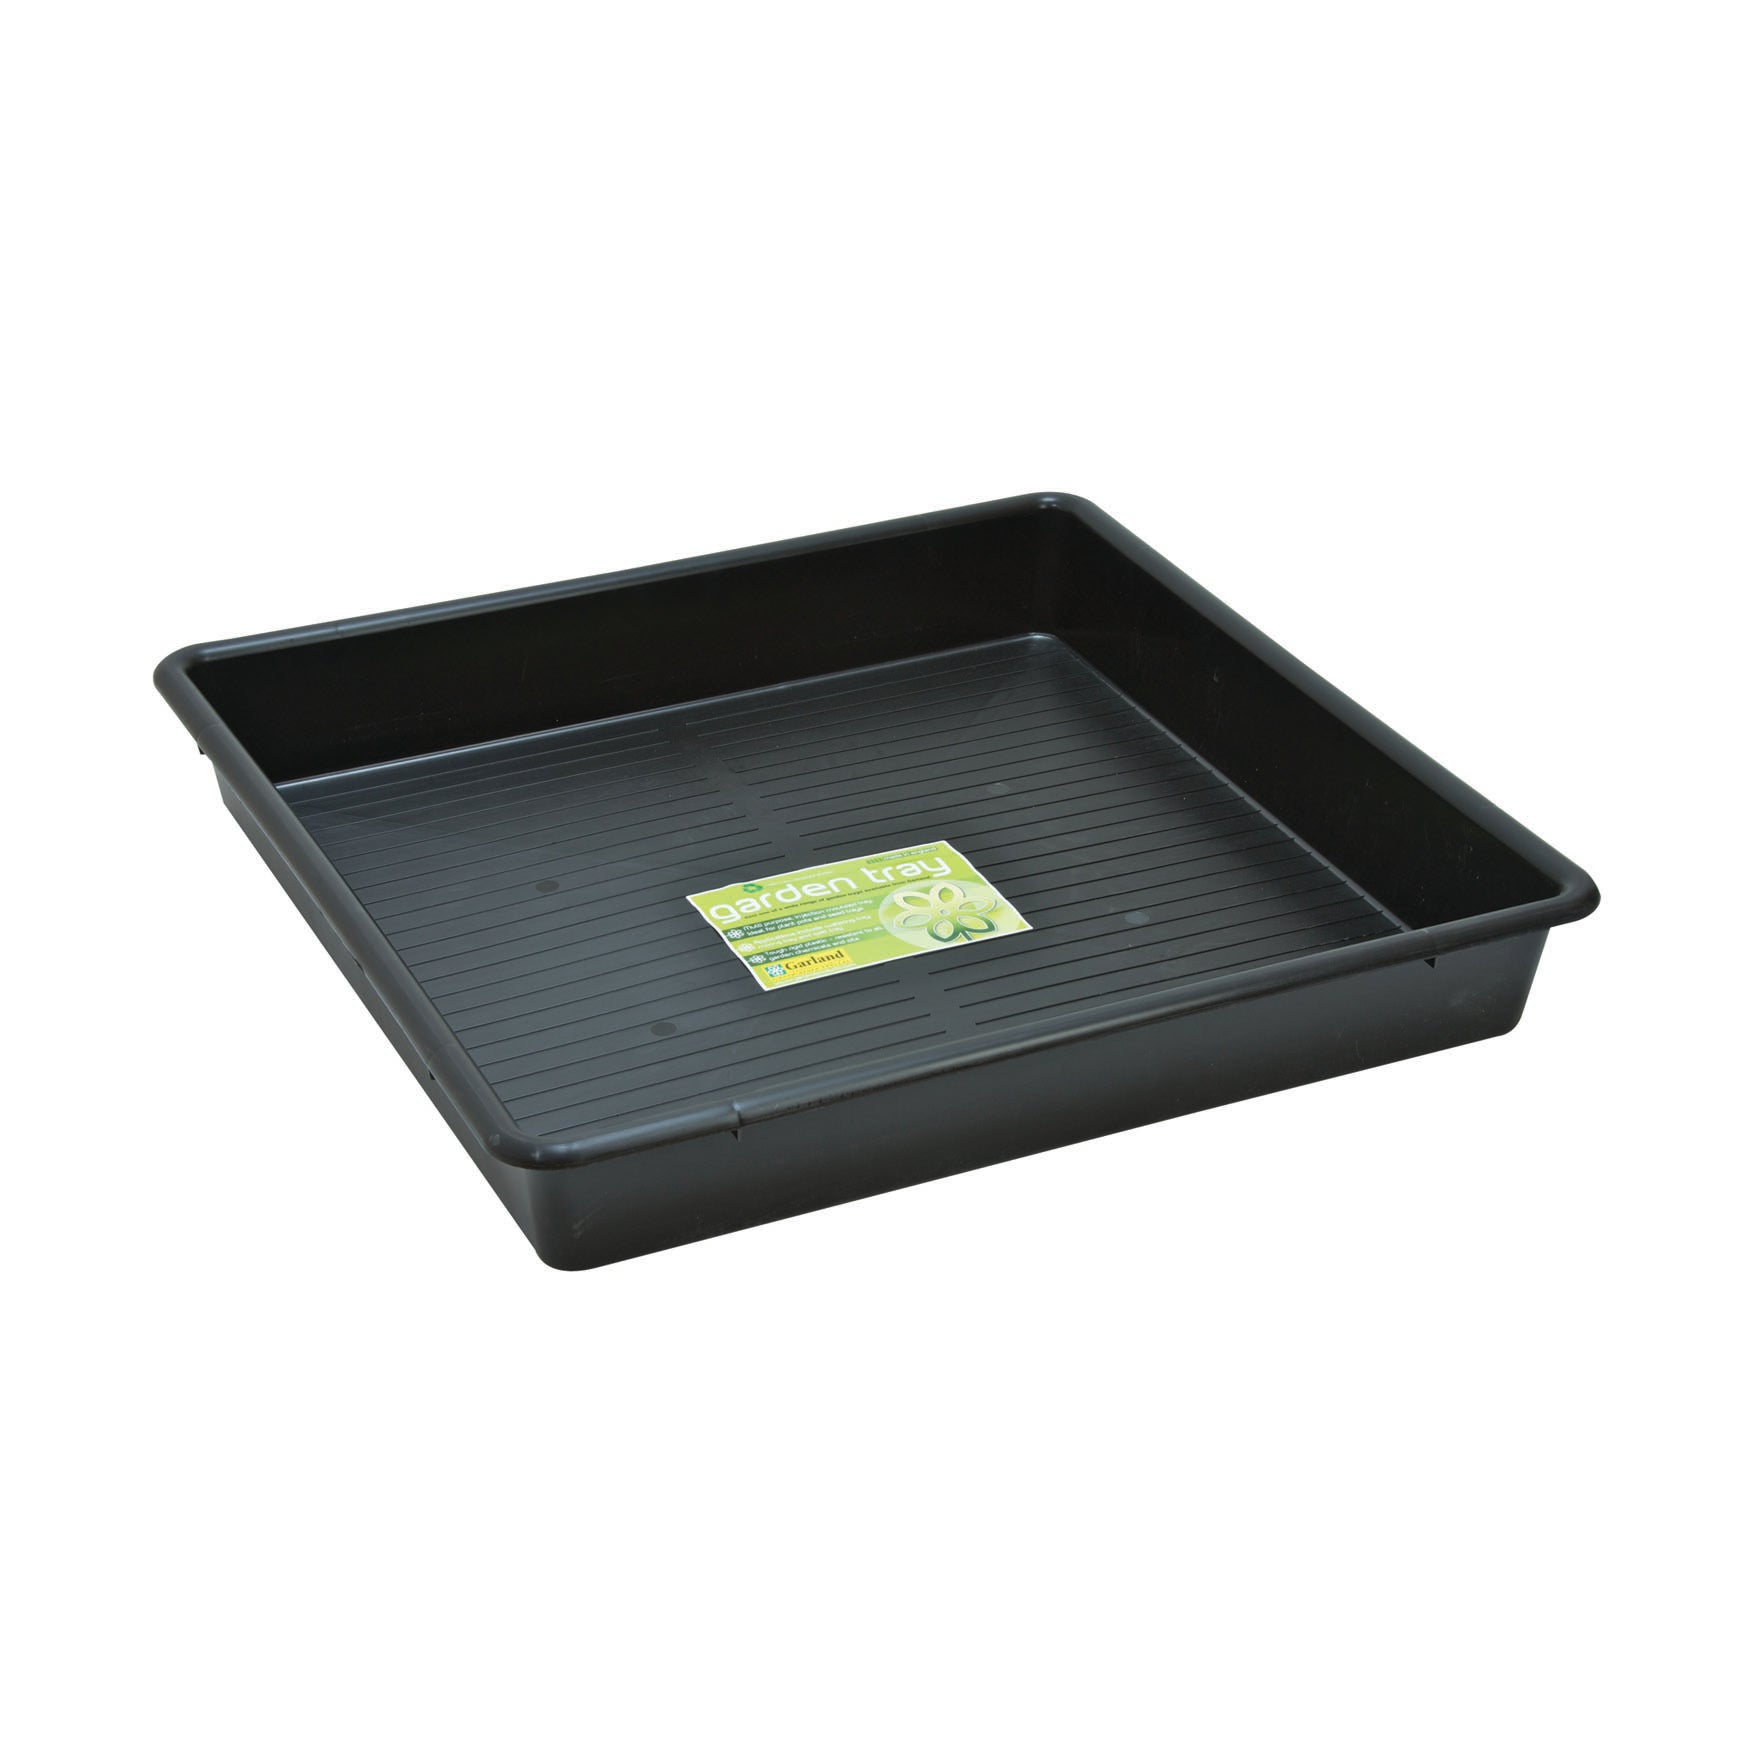  Black Square Garden Tray. Made from recycled polypropylene. 20 gallon capacity. 32"L x 32"W x 5"H, 5.5lbs.